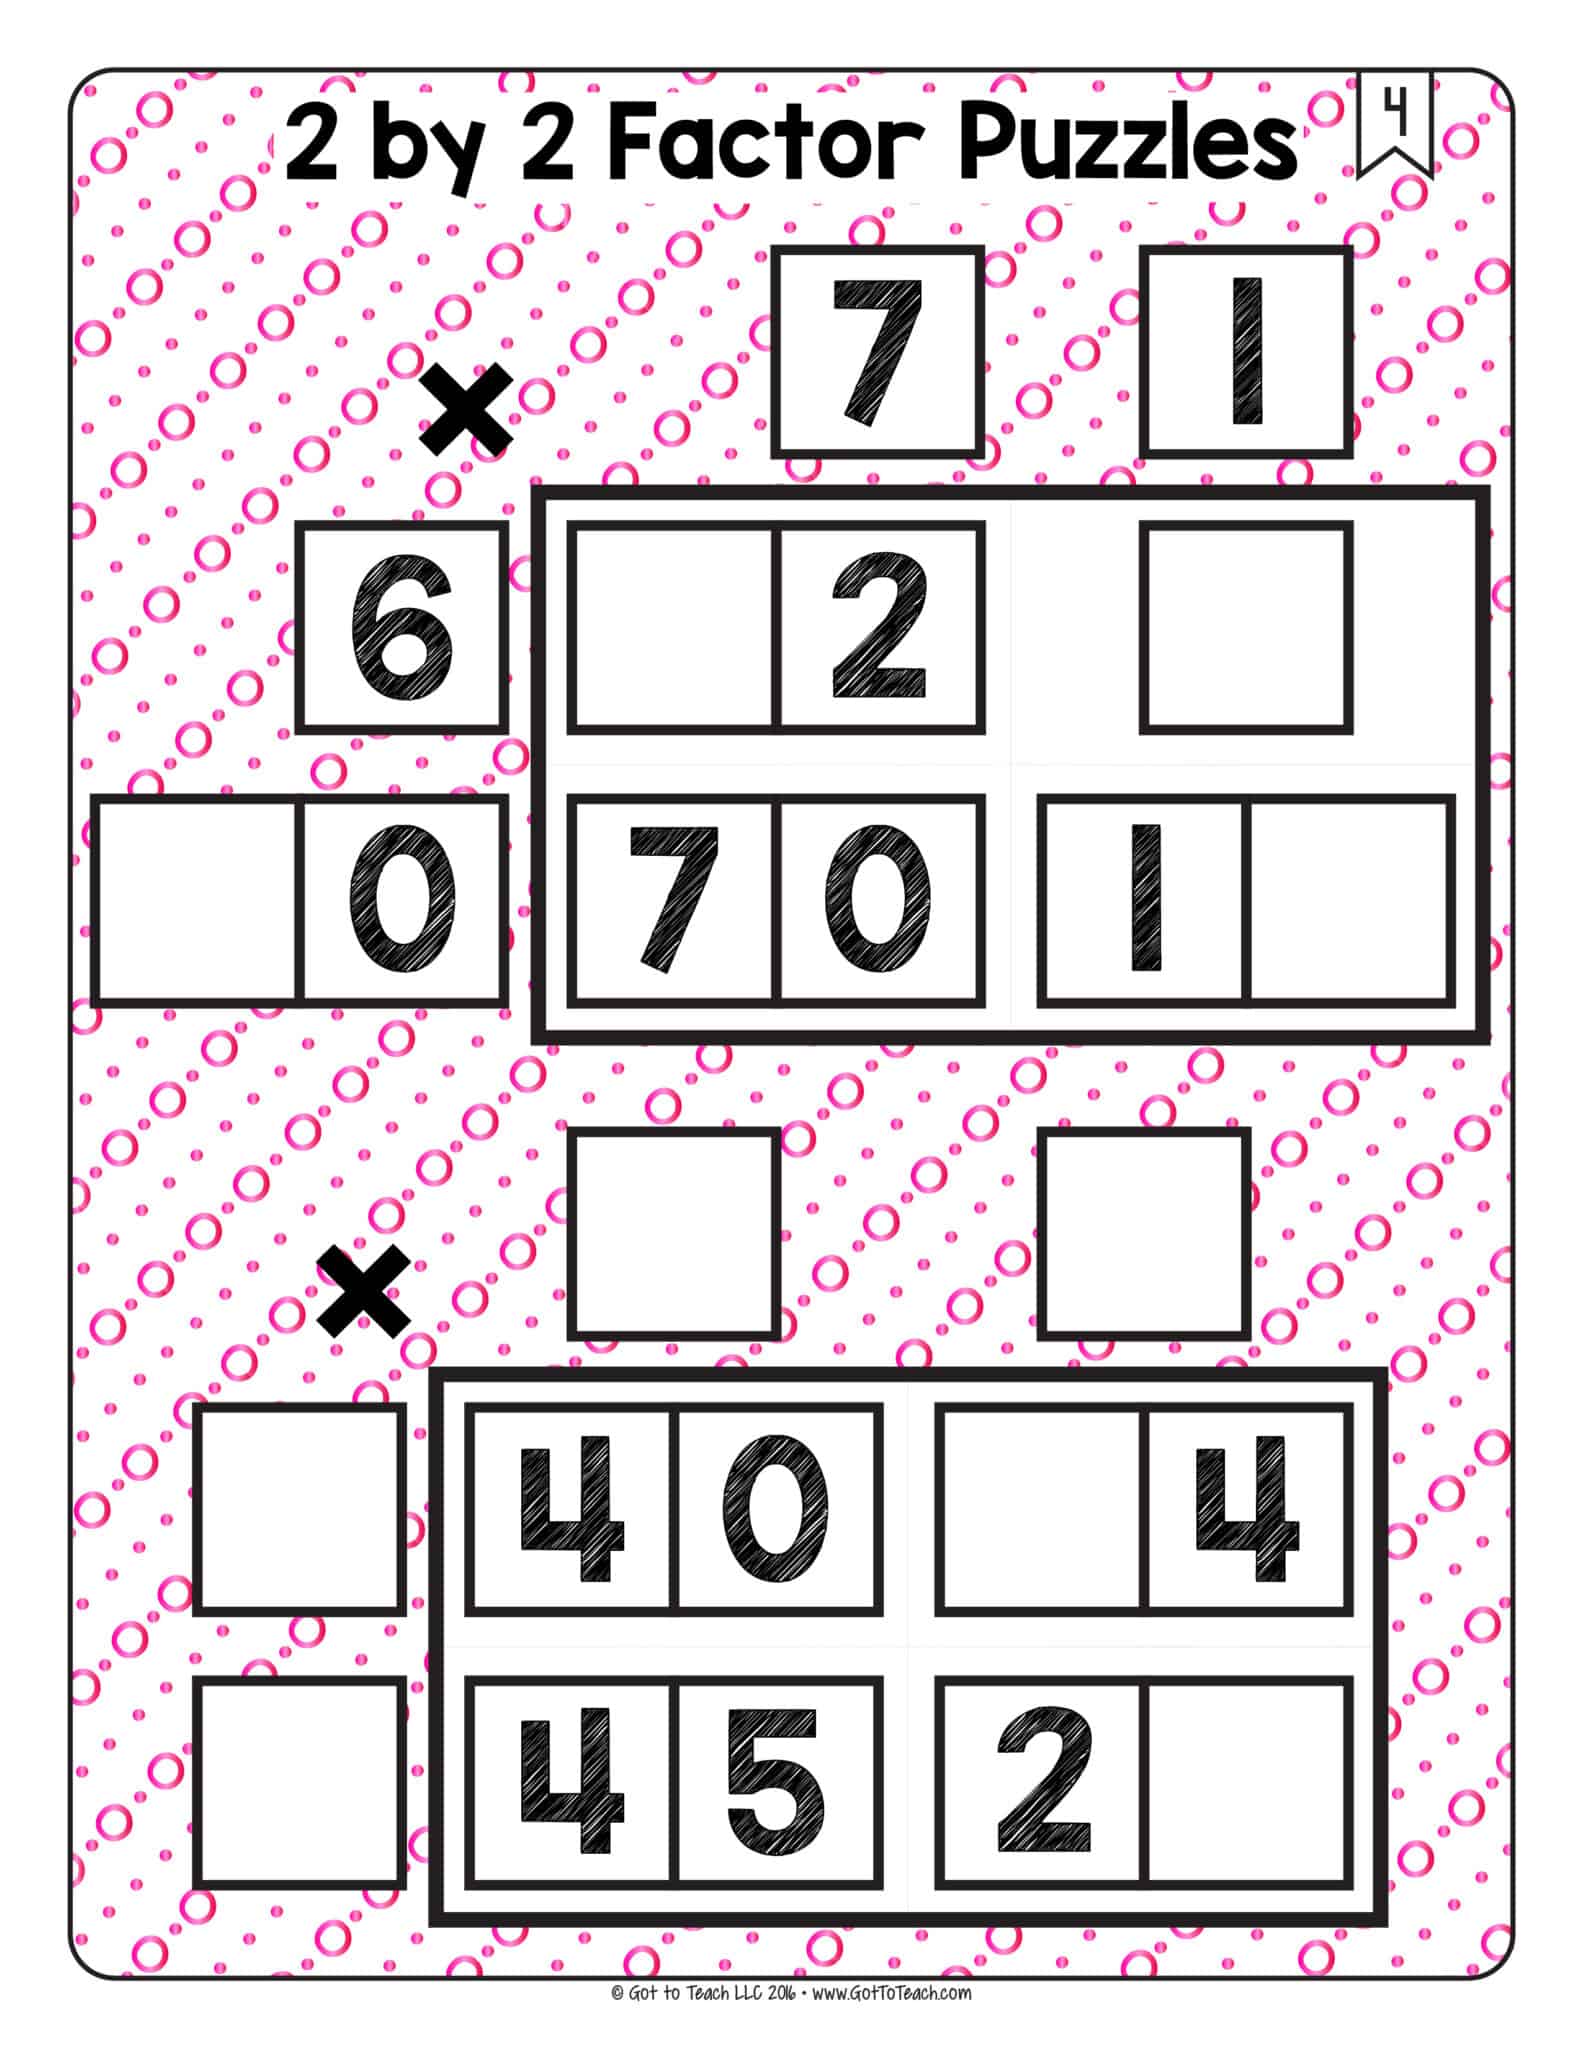 2 by 2 Factor Puzzles